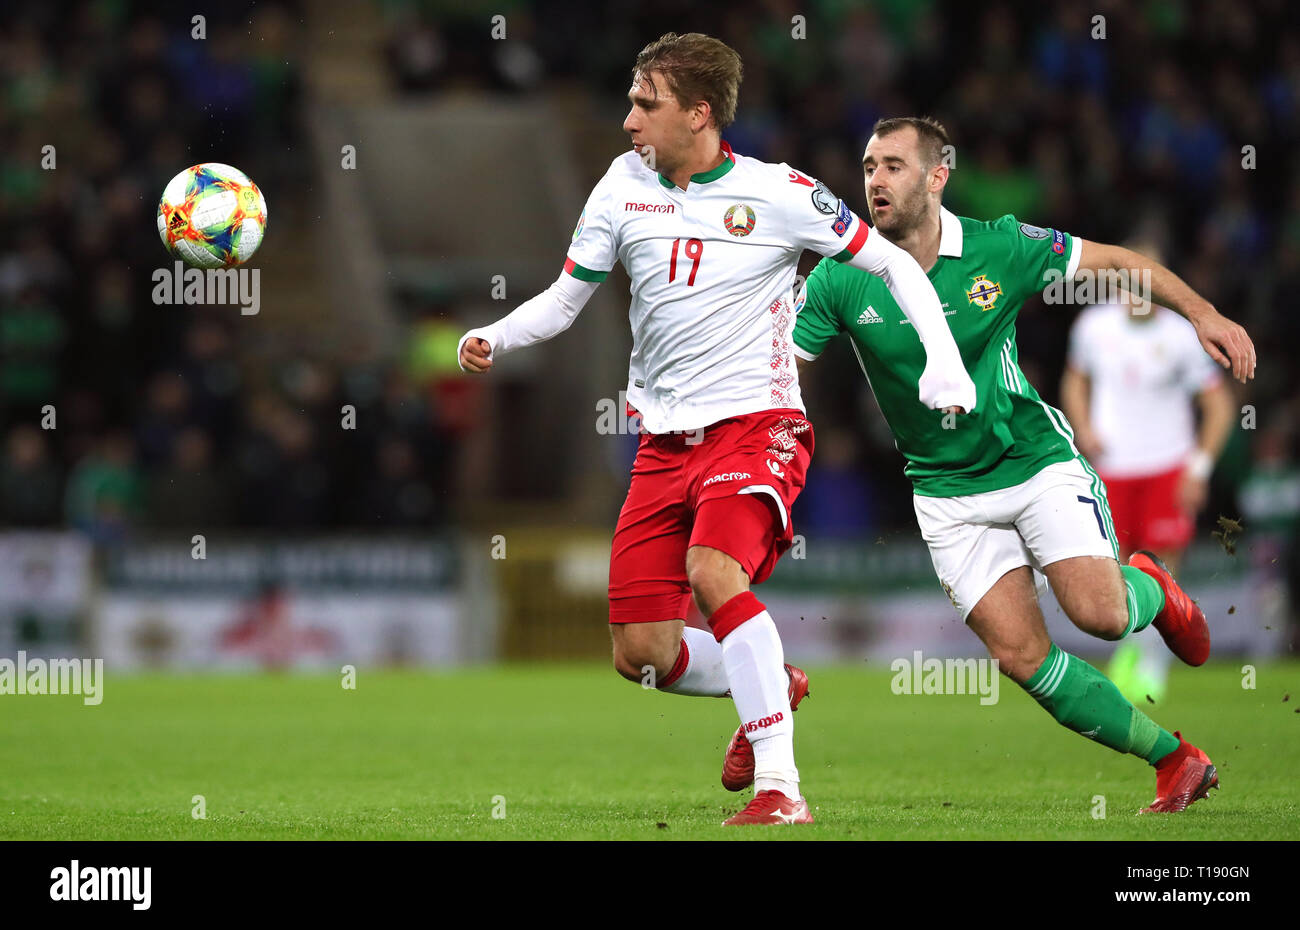 Belarus' Maksim Valadzko (left) and Northern Ireland's Niall McGinn battle for the ball during the UEFA Euro 2020 Qualifying, Group C match at Windsor Park, Belfast. Stock Photo